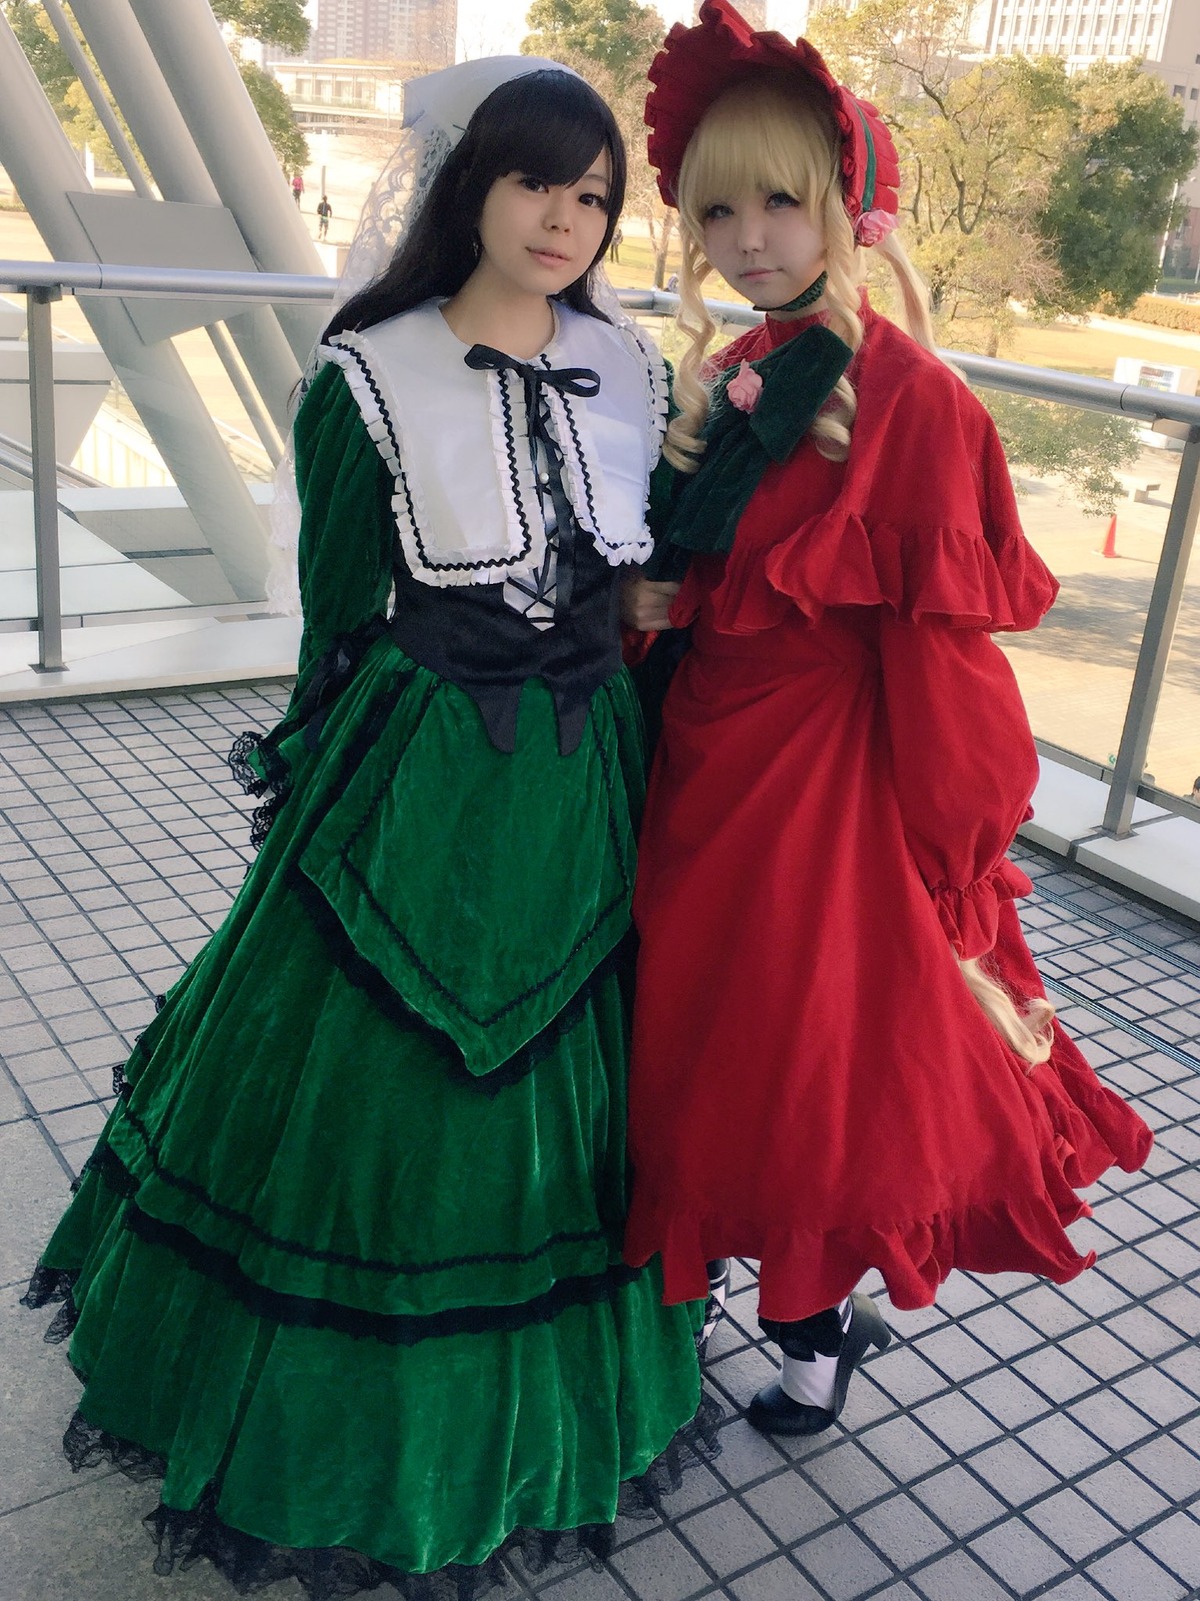 2girls bangs black_hair blonde_hair bonnet building bush capelet chain-link_fence day dress fence green_dress long_hair long_skirt long_sleeves looking_at_viewer multiple_cosplay multiple_girls outdoors pavement red_dress shoes standing tagme tile_floor tiles white_legwear window